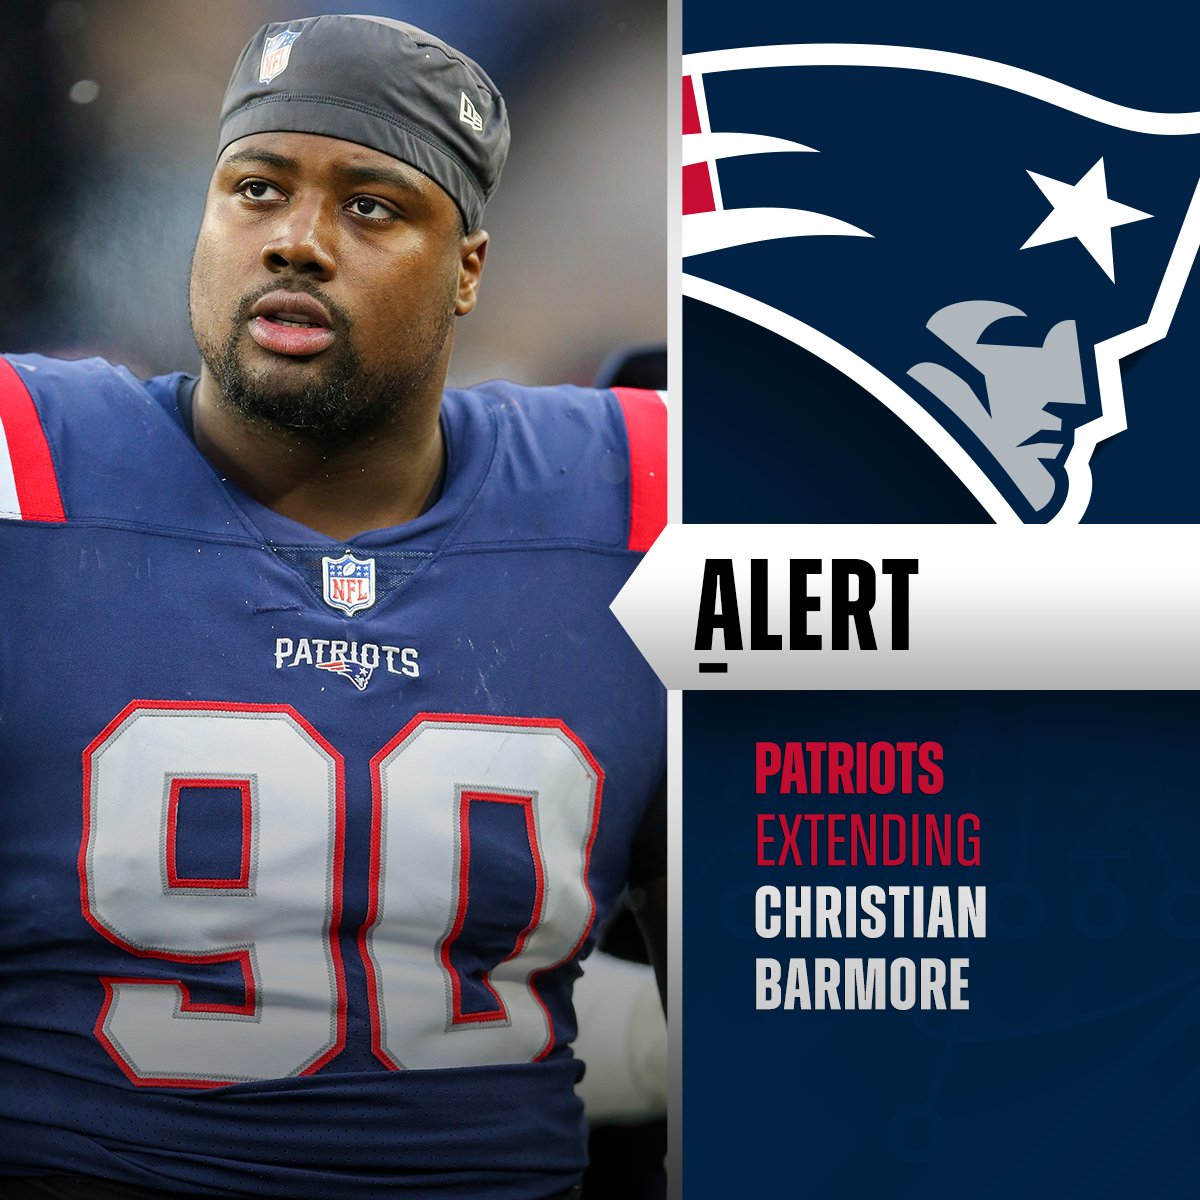 Patriots to extend DT Christian Barmore to 4-year deal worth up to $92M. (via @RapSheet, @TomPelissero)